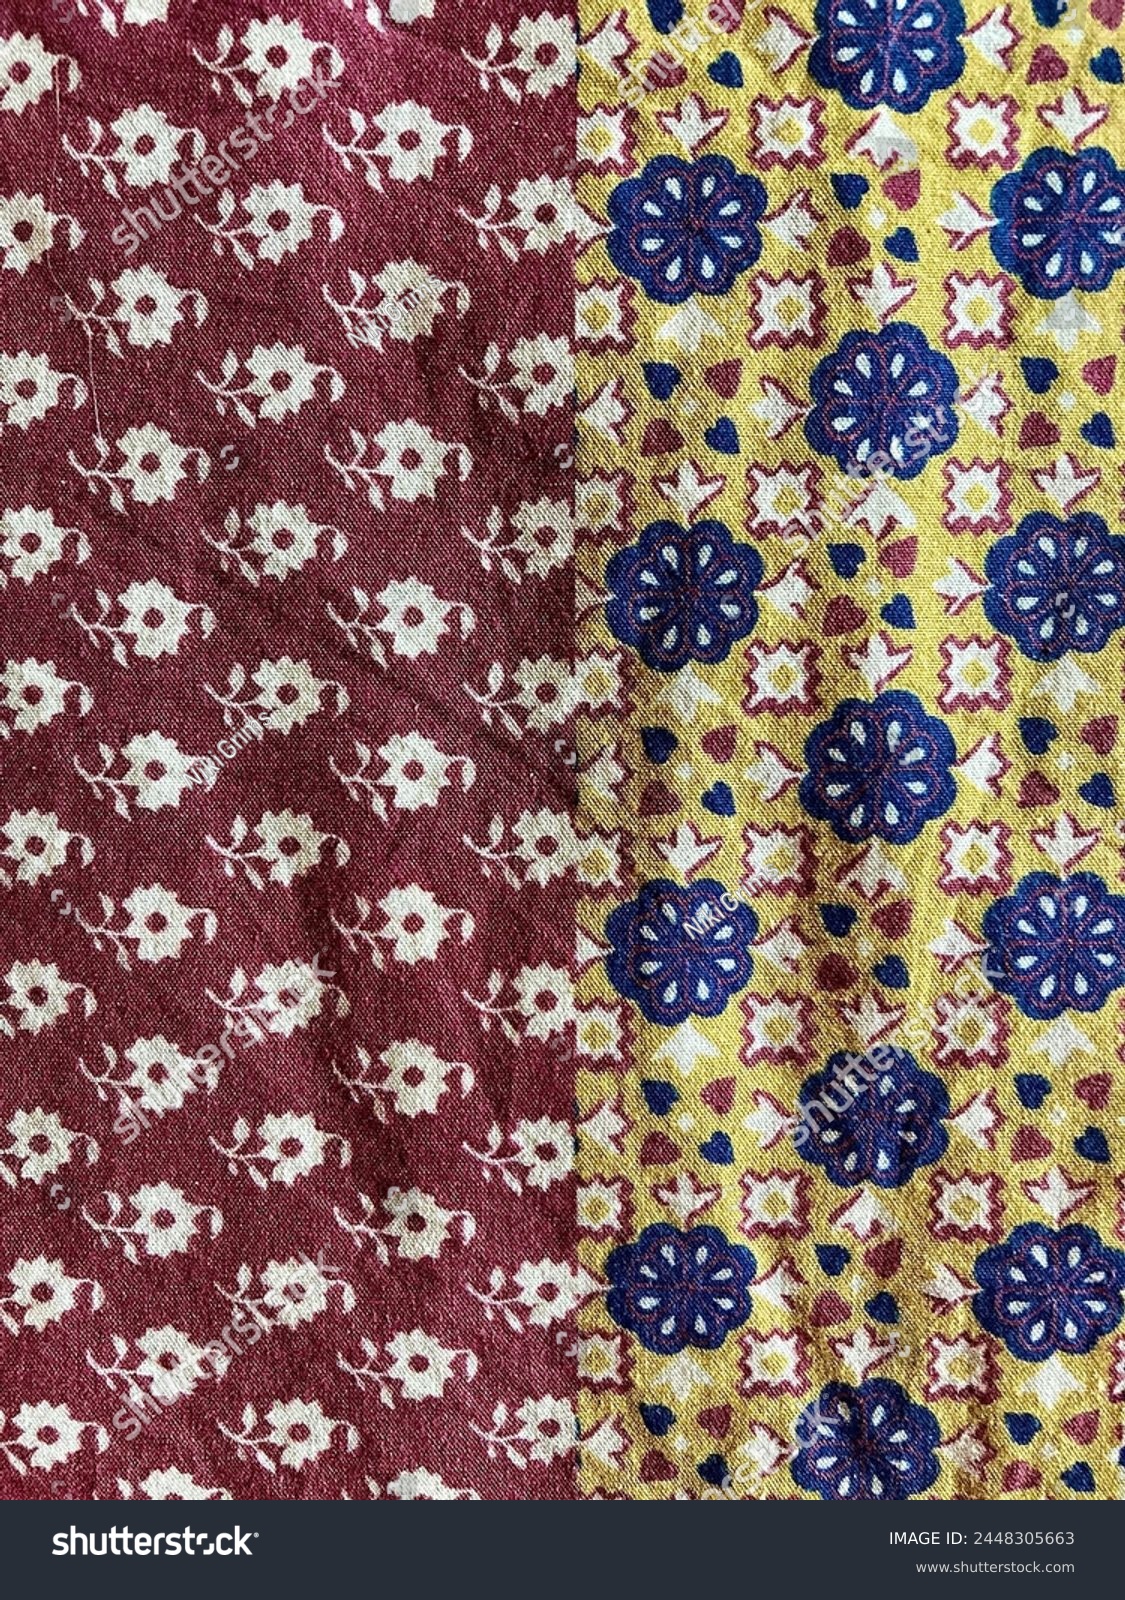 Colorful bohemian pattern on a cotton fabric #2448305663